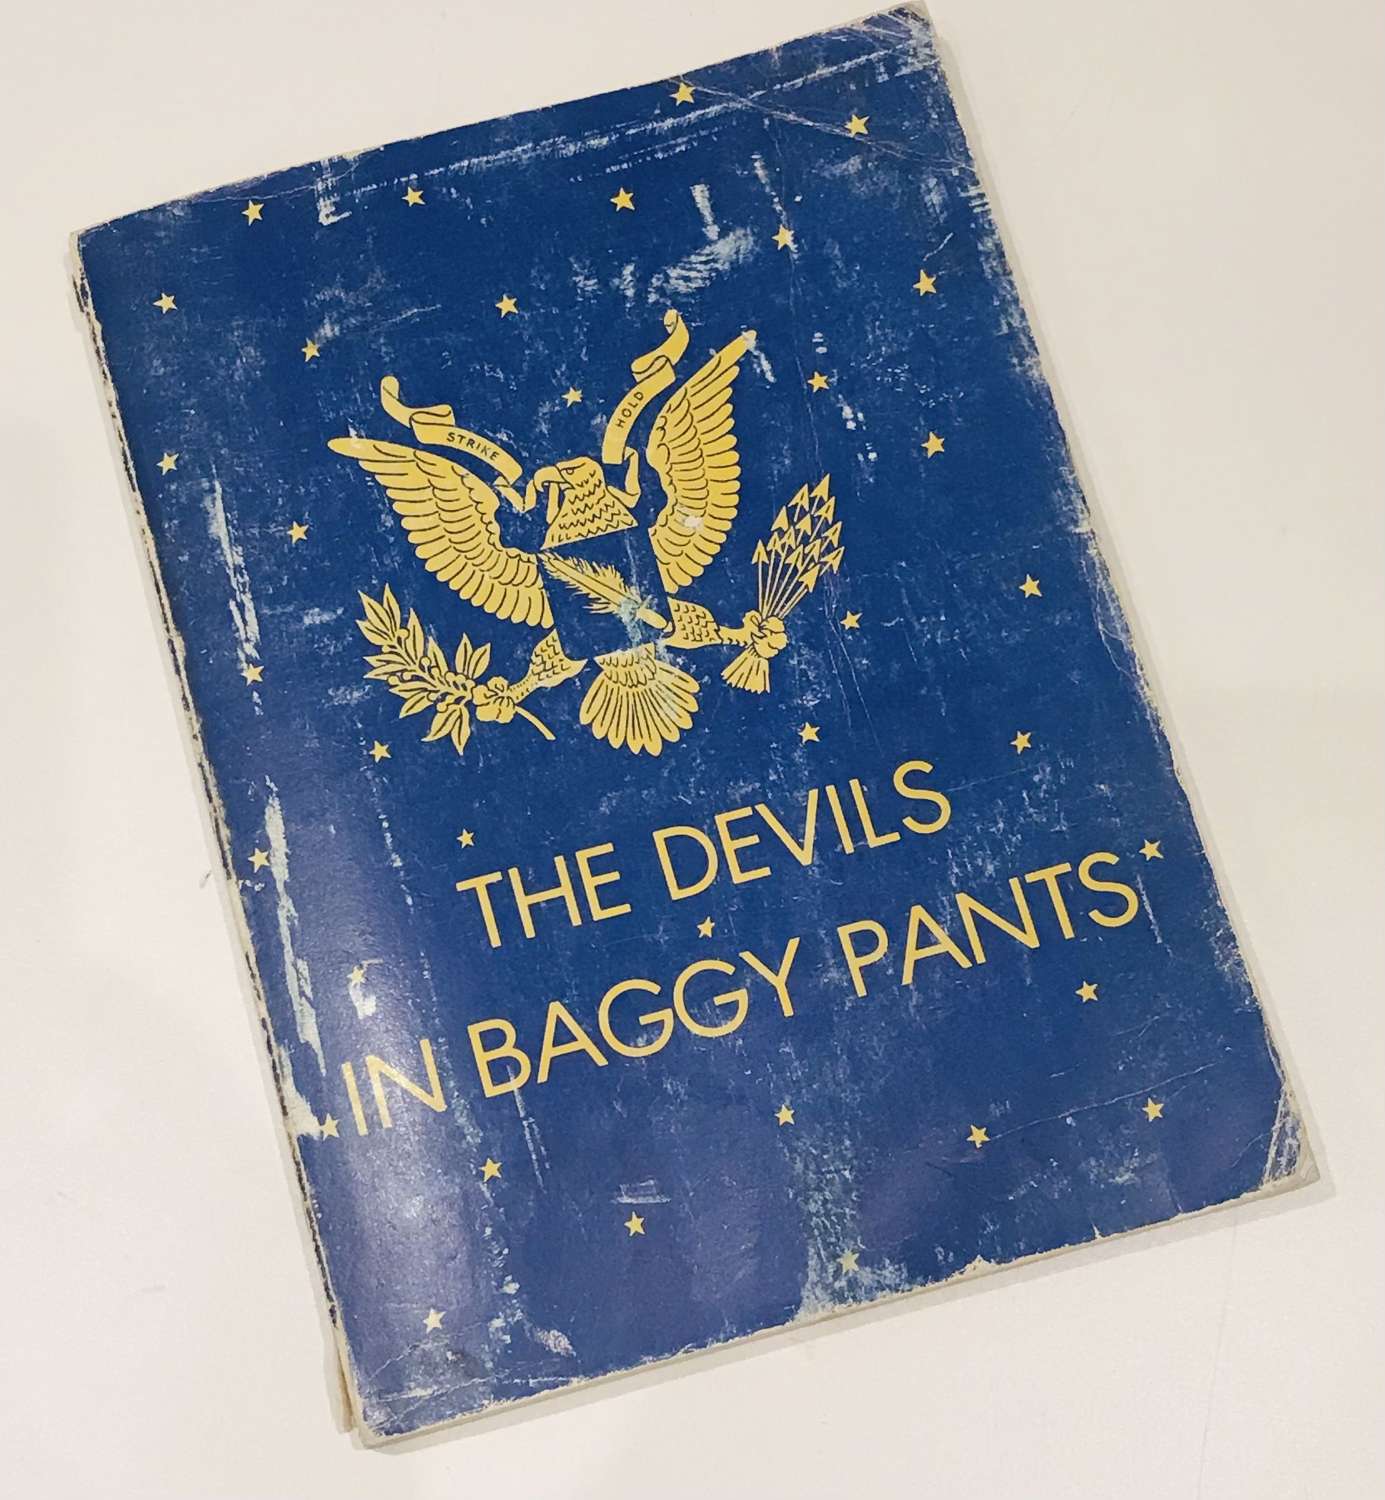 1976 copy of the devils in baggy pants